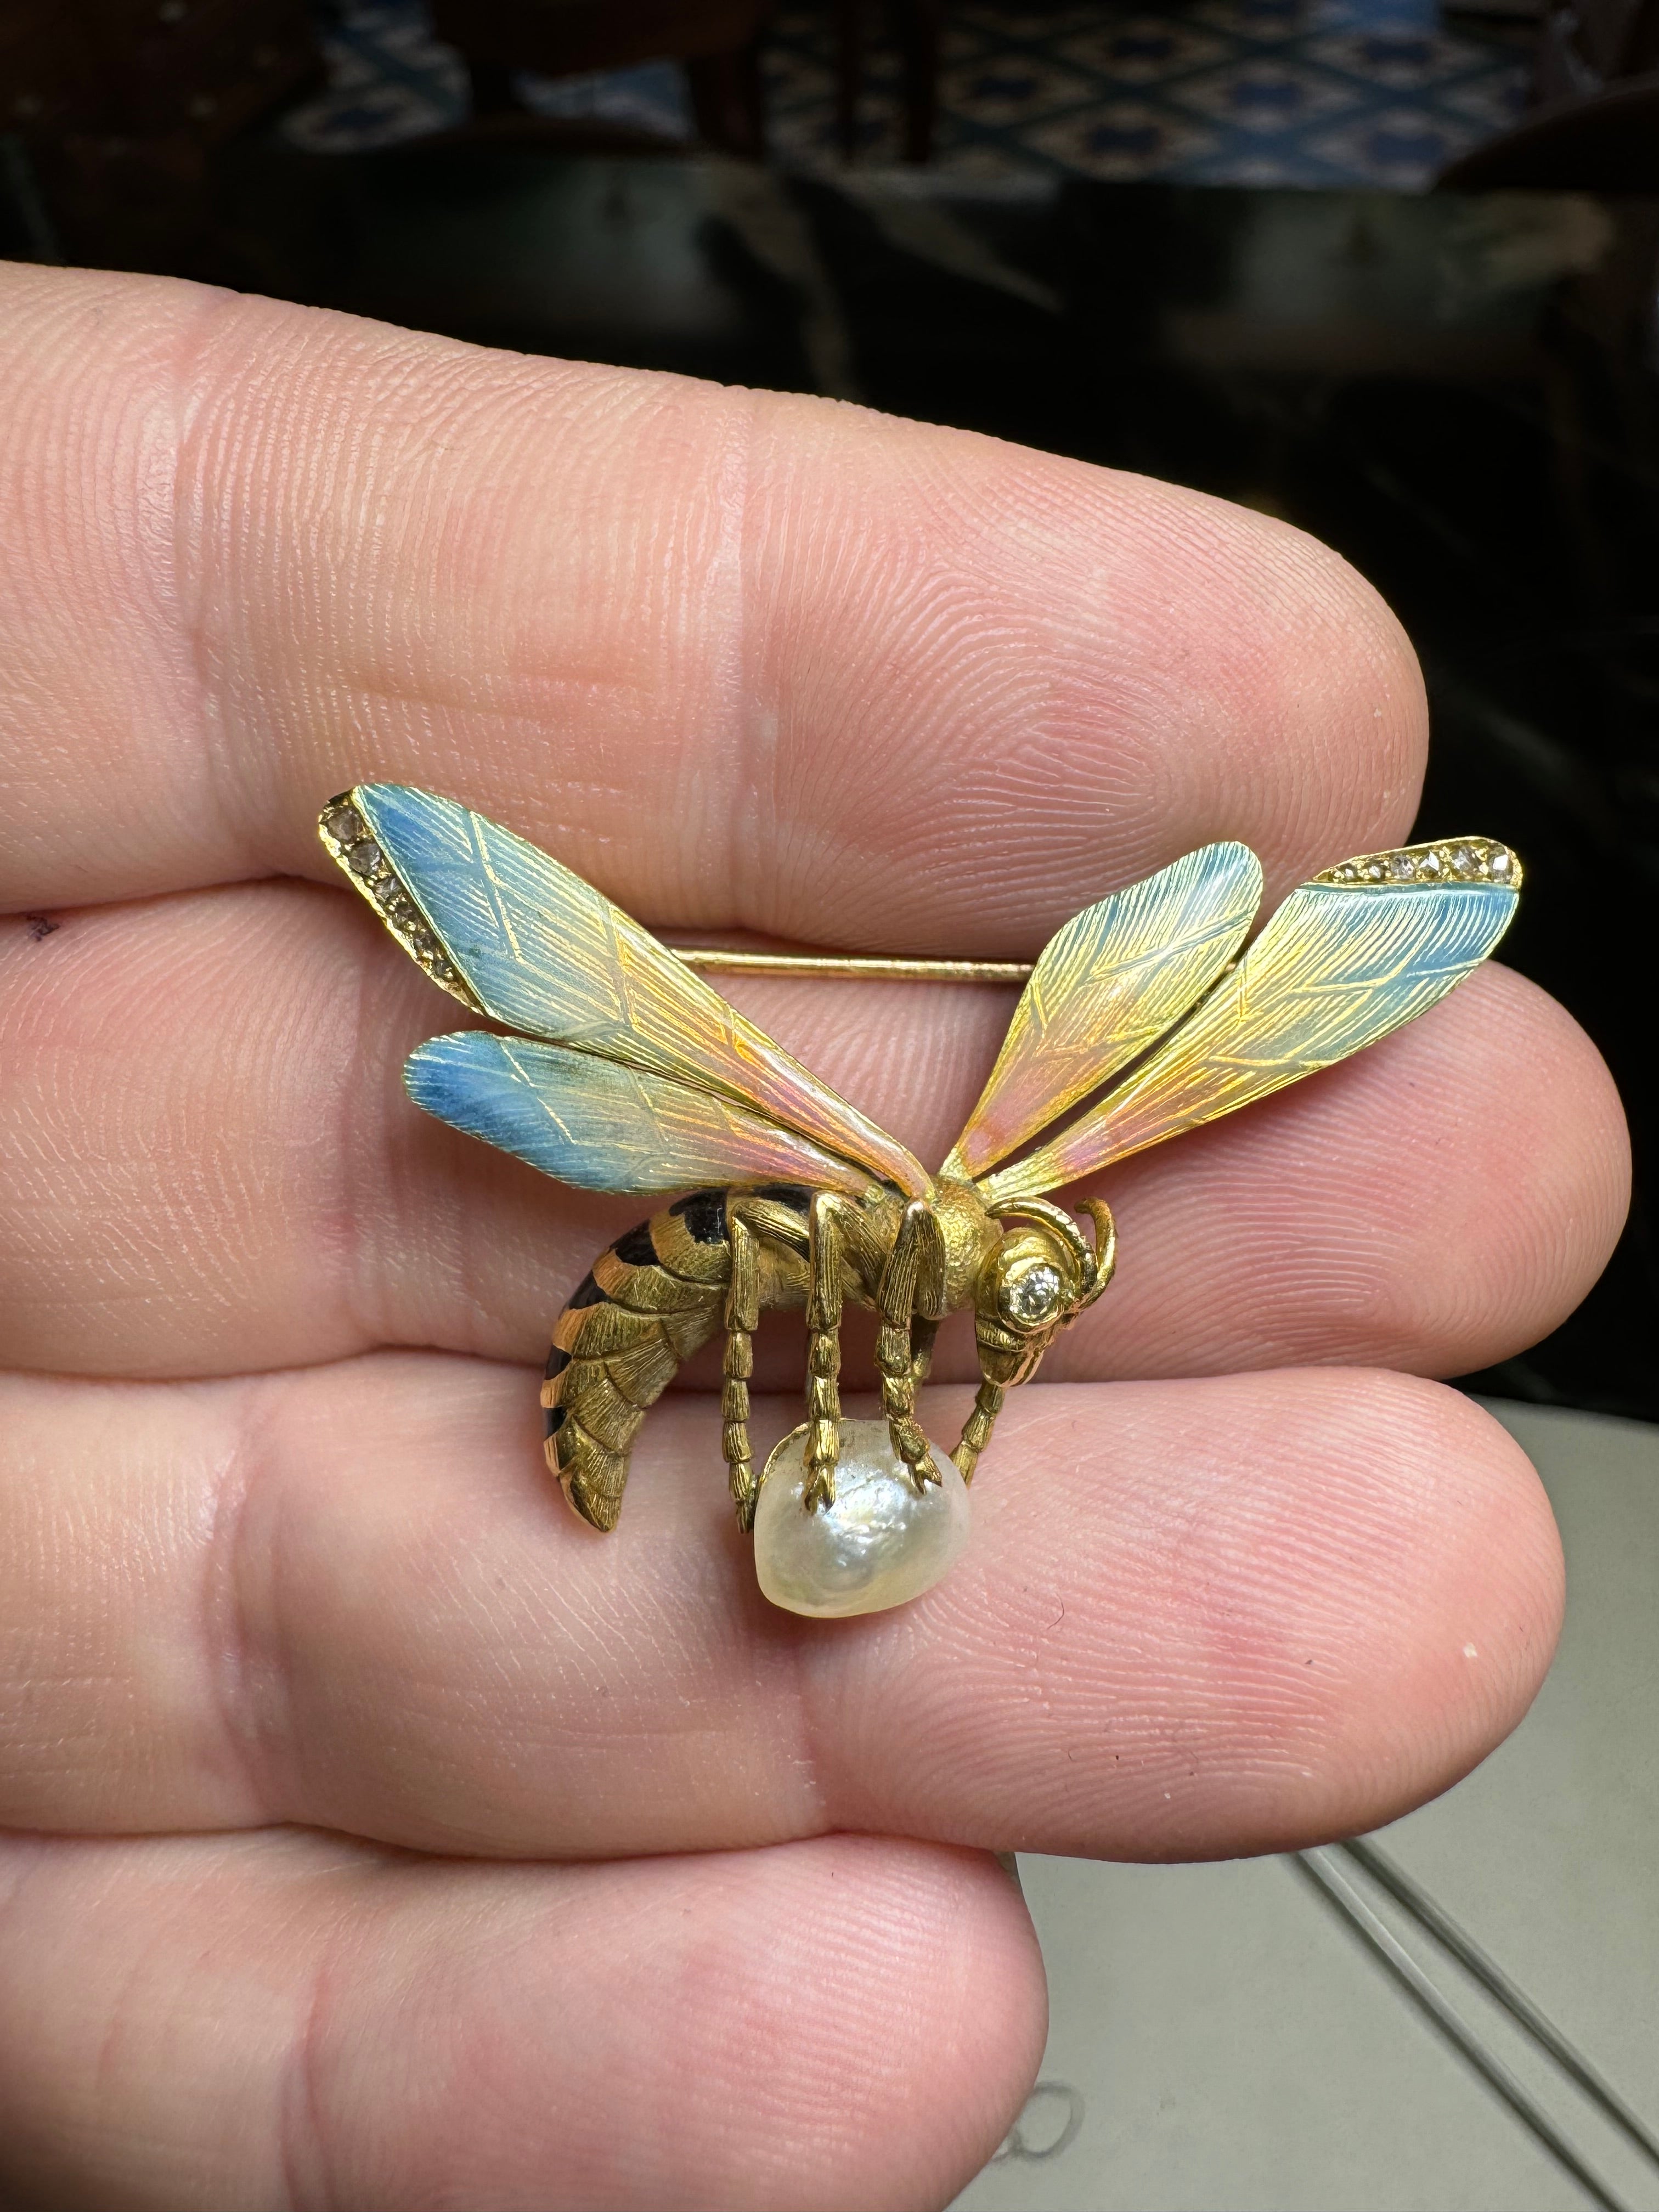 18k Yellow Gold, Enamel Diamond & Natural Pearl Wasp or Hornet Brooch